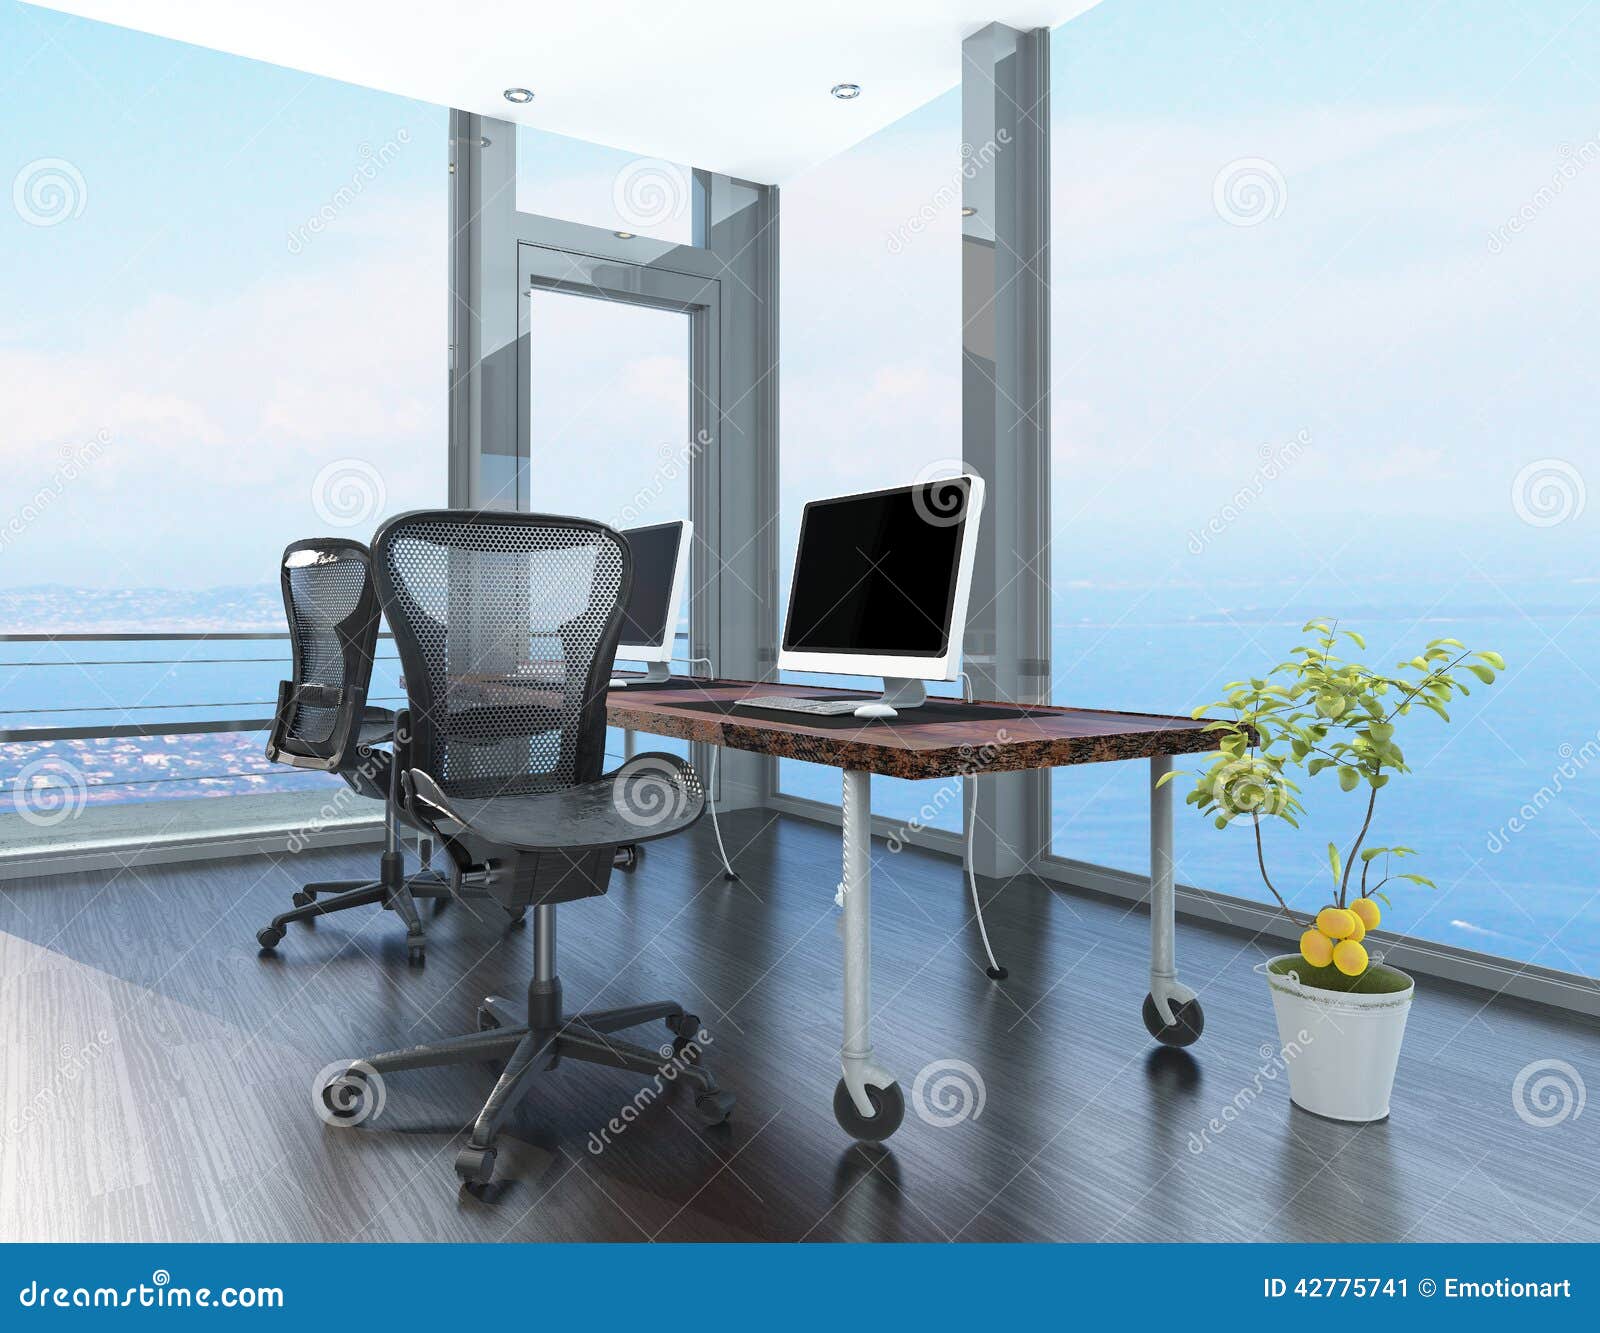 Home Office In A Coastal Apartment Stock Illustration